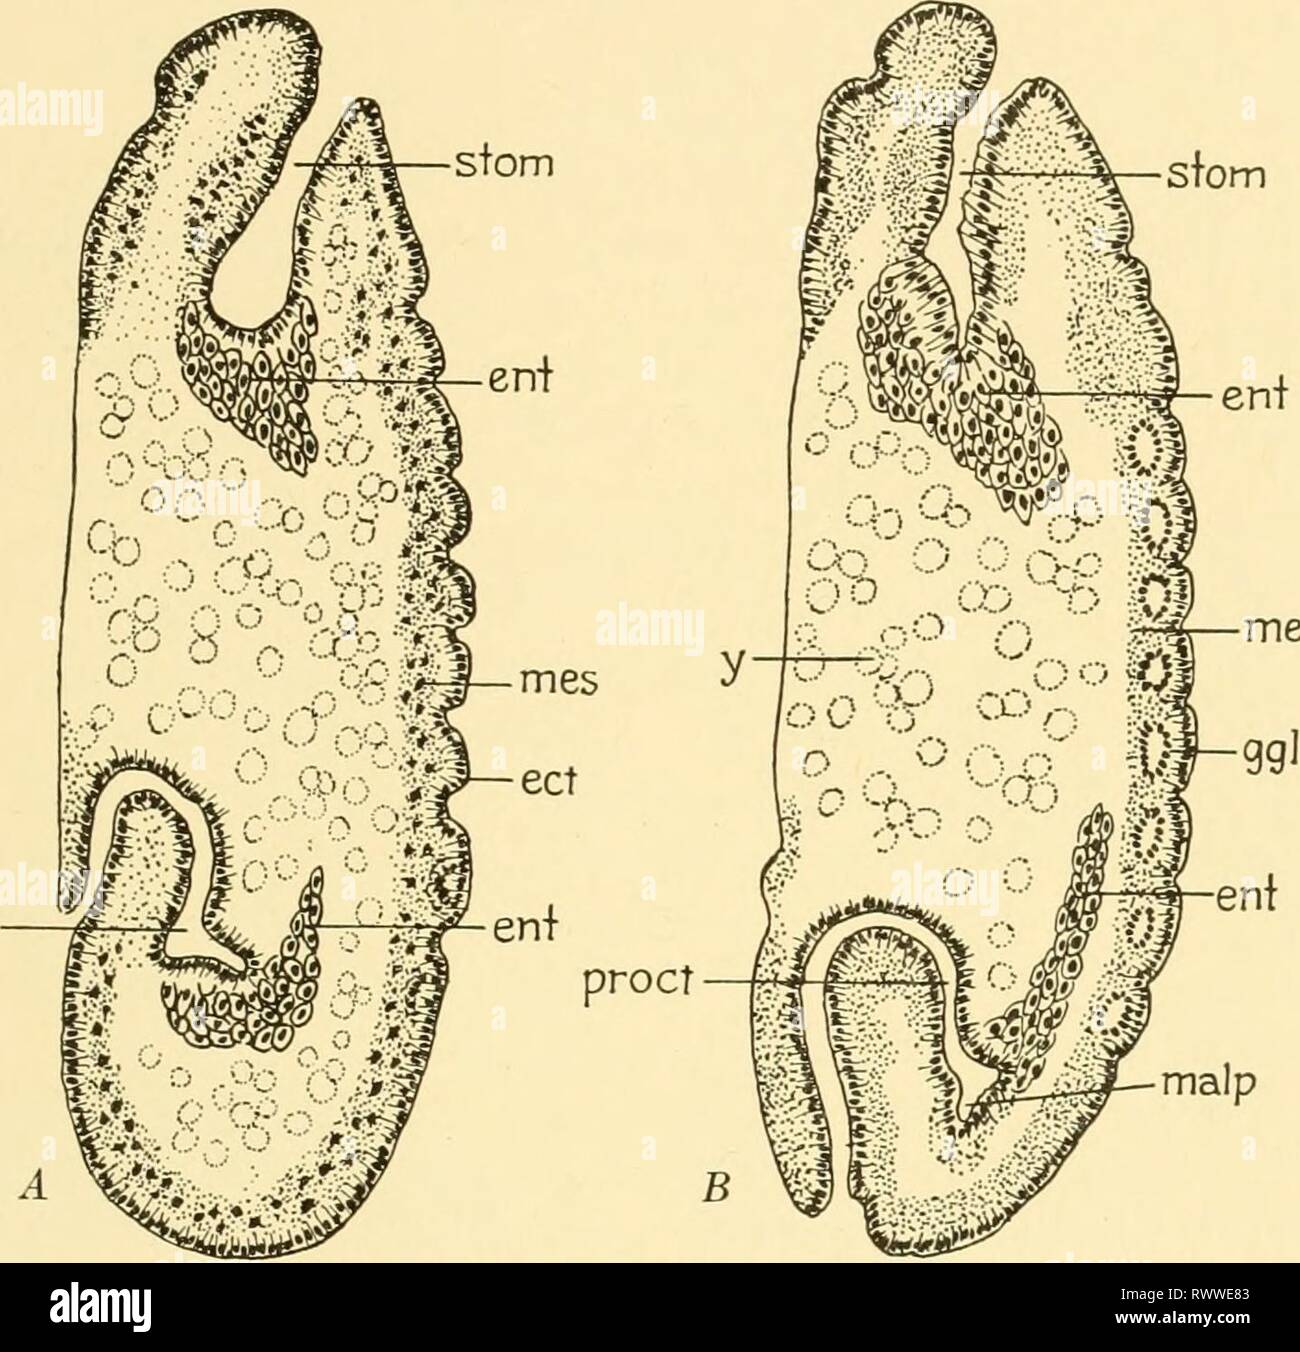 Embryology of insects and myriapods; Embryology of insects and myriapods; the developmental history of insects, centipedes, and millepedes from egg desposition [!] to hatching embryologyofinse00joha Year: 1941  SIPHON APTERA AND DIPT ERA 377 writers confused the amniotic cavity with the proctodaeum, giving rise to erroneous interpretations. As development continues, the caudal end pushes still farther forward; the proctodaeum deepens; and from near its extremity, dorsal and ventral diverticula, the beginnings of the Mal- pighian tubules, appear. The posterior mesenteron rudiment is closely fus Stock Photo